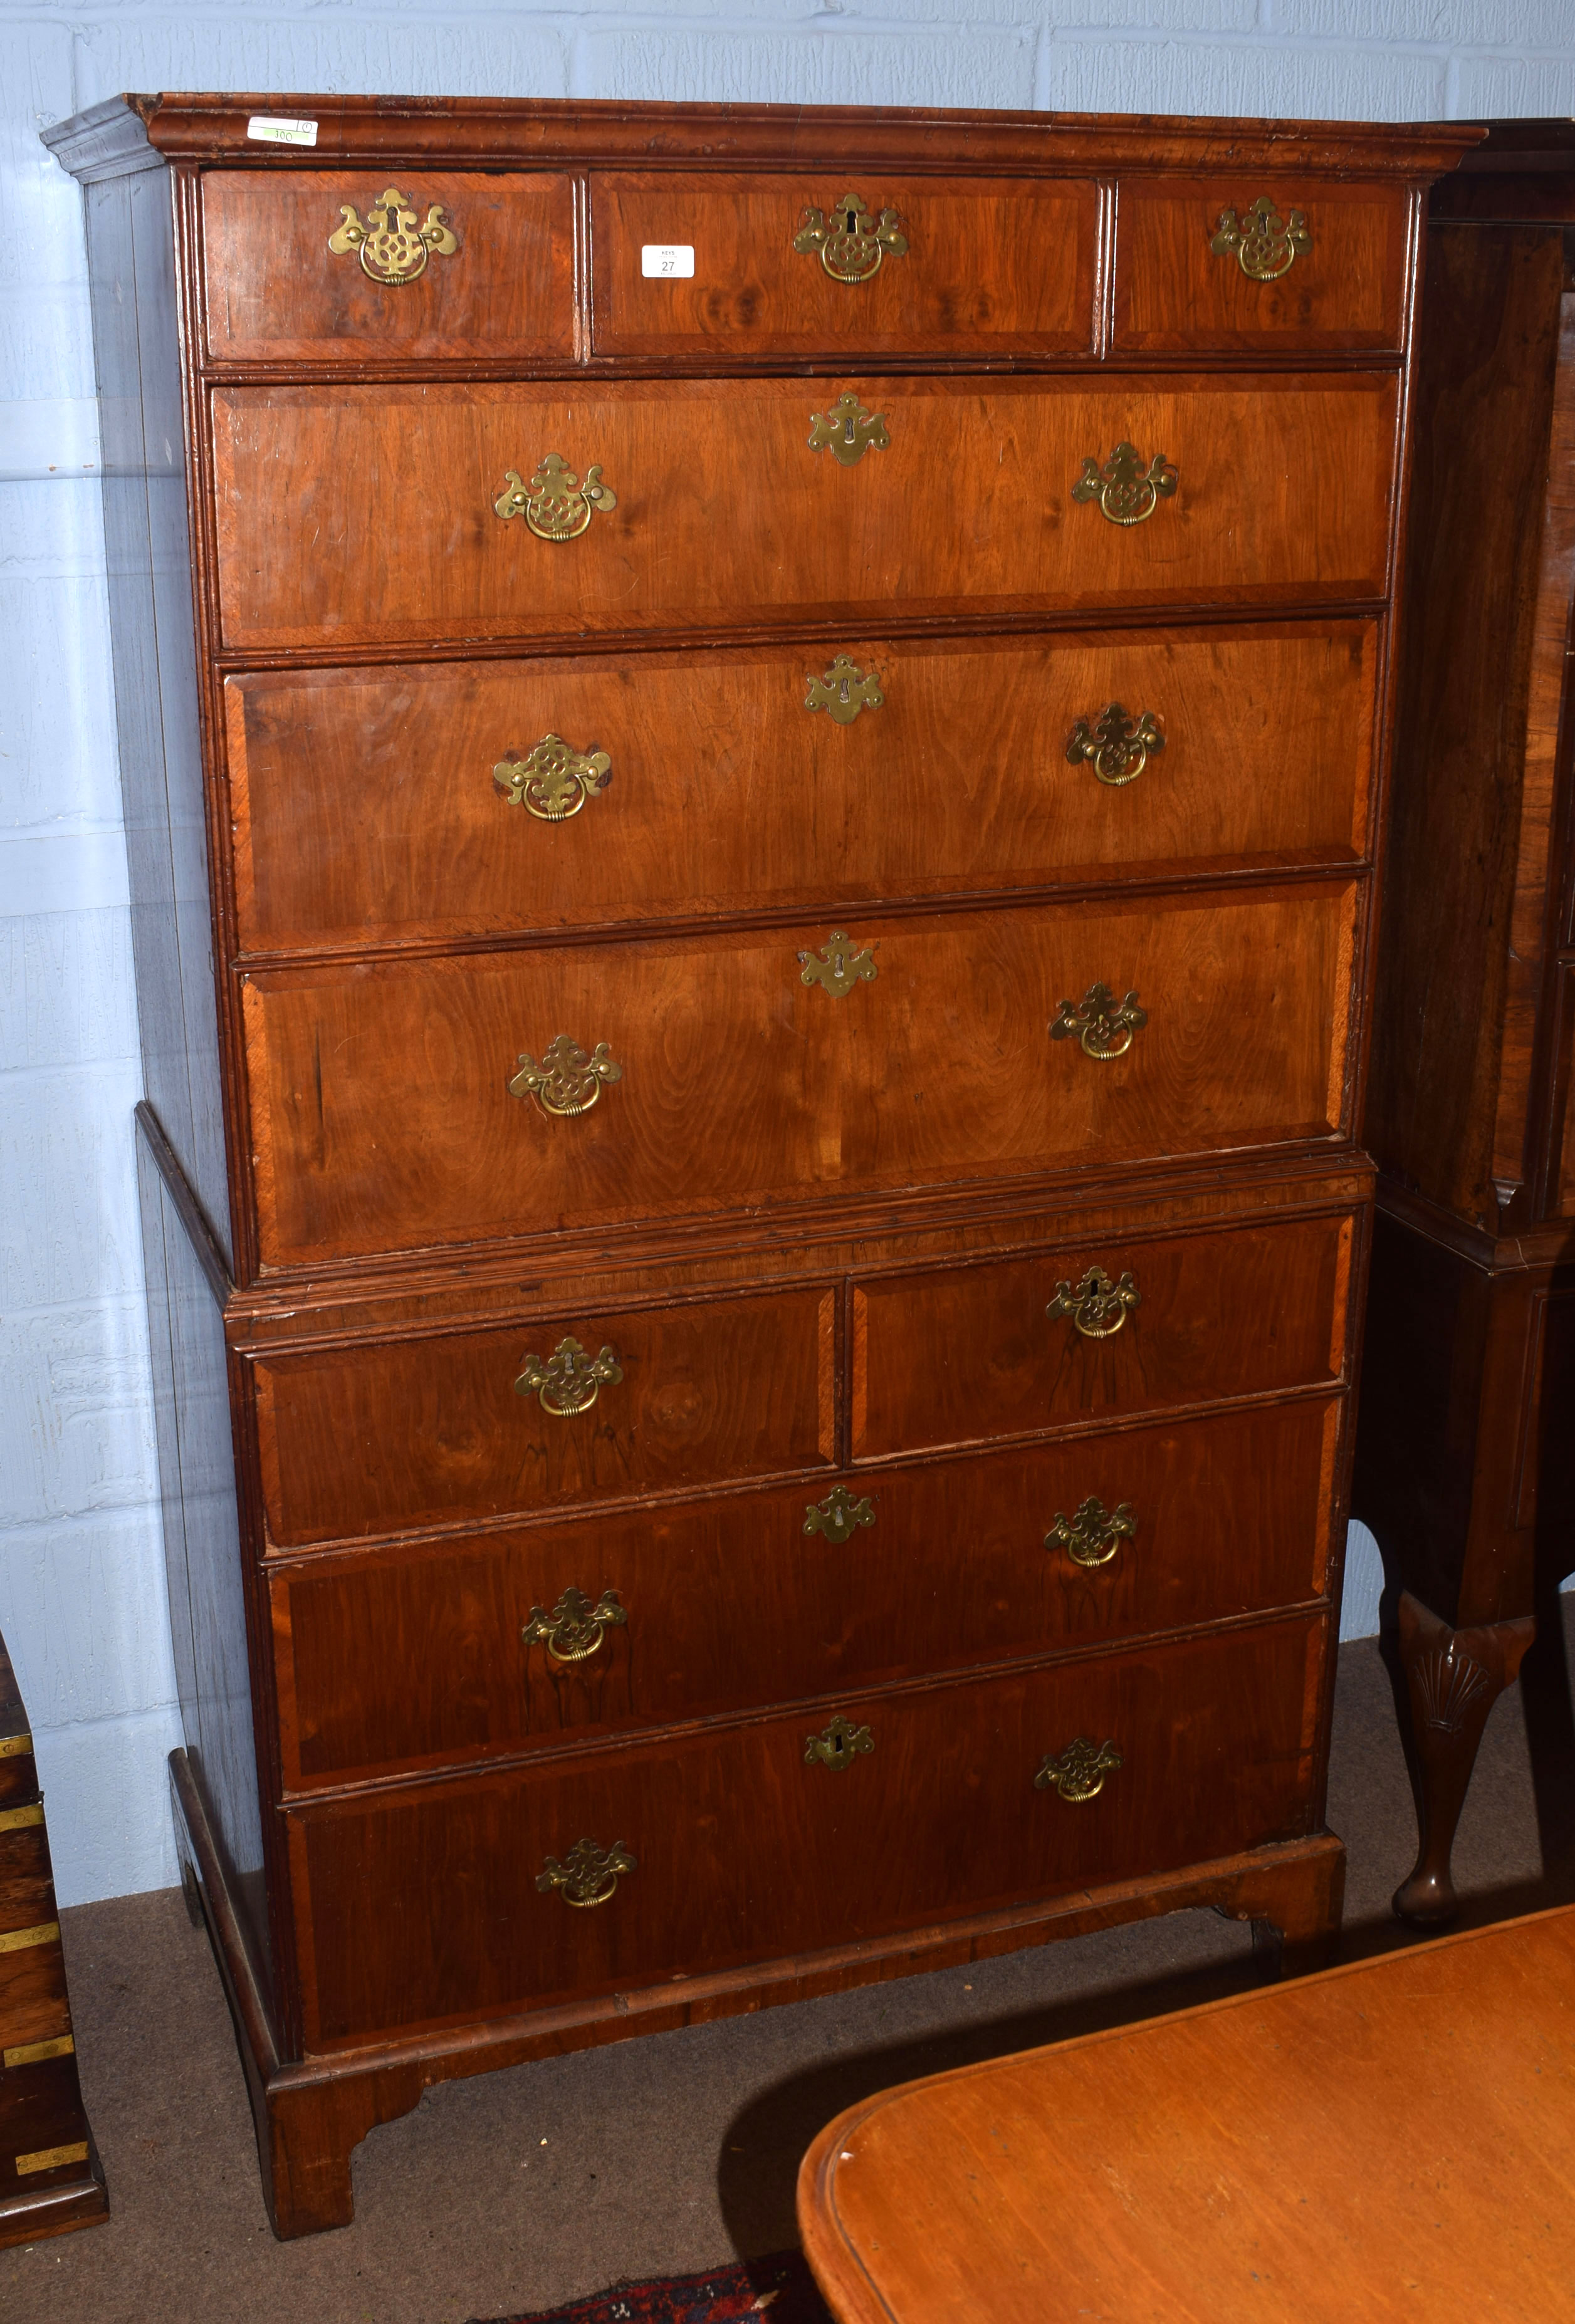 18th century oak and walnut chest on chest, upper section with six drawers, lower section with